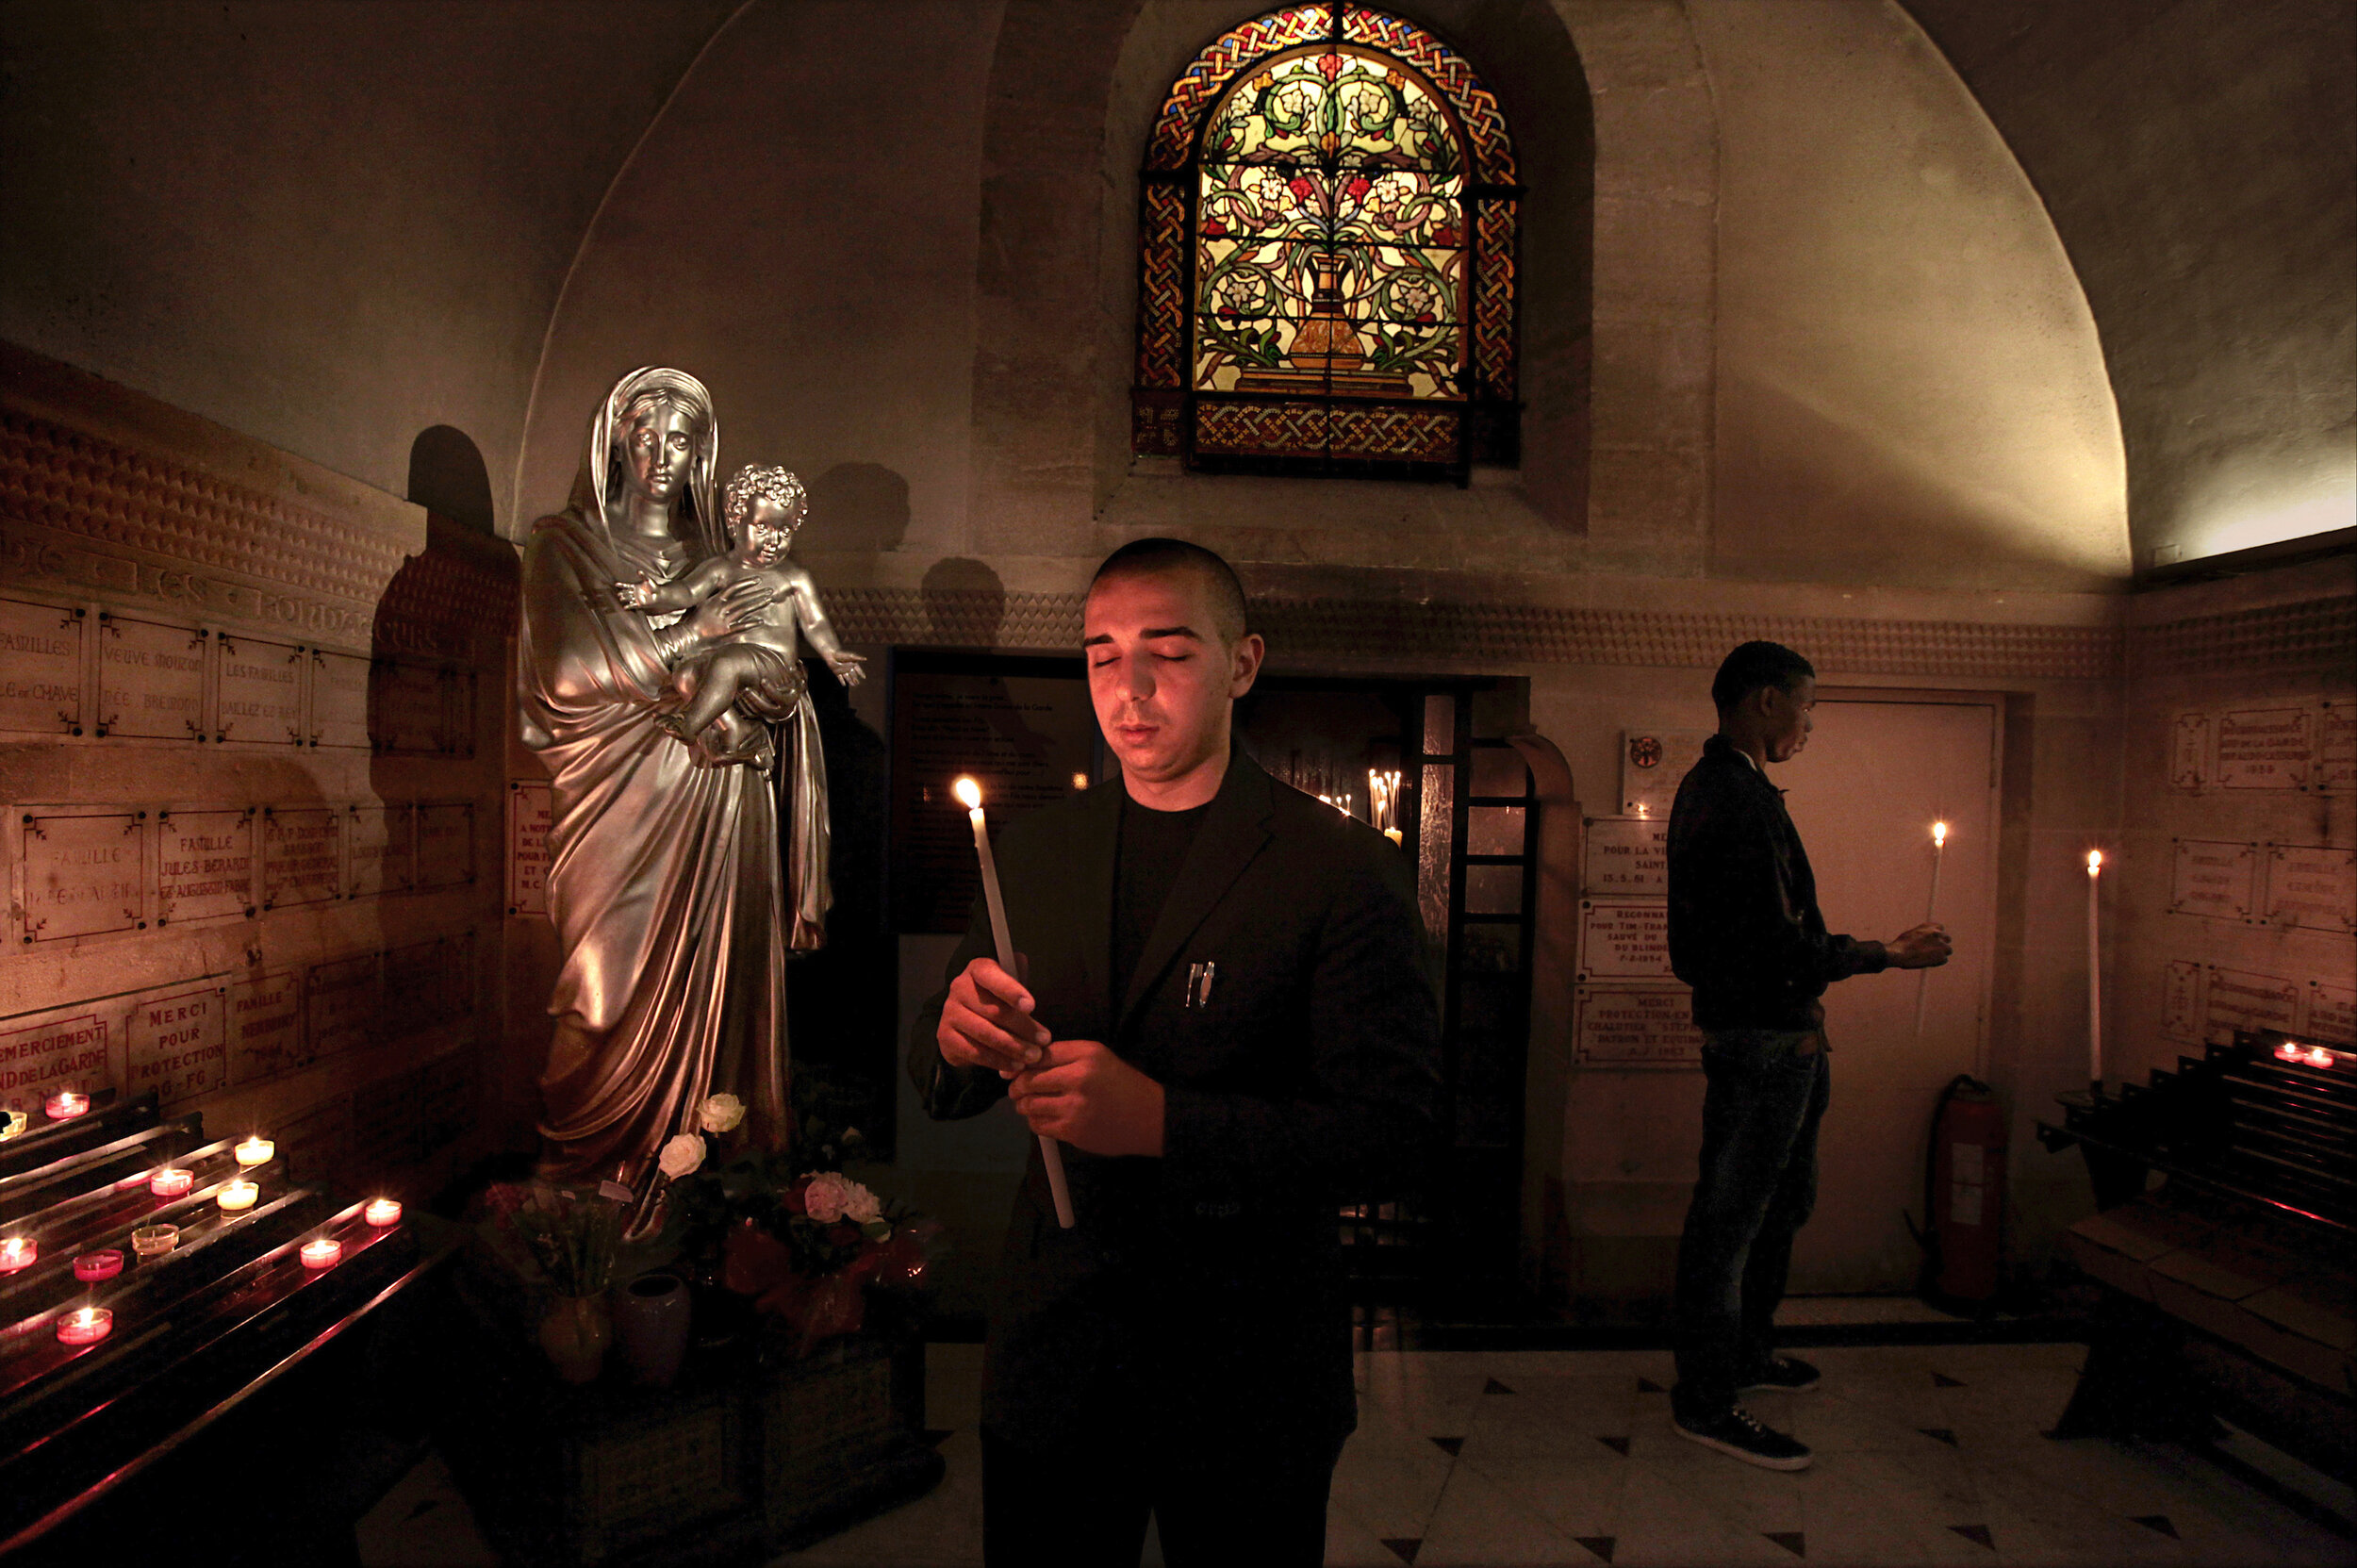   France. Marseille. 2014. Sylvain Massoudi, 25, lights a candle at the Notre Dame de la Garde. Sylvain, an Iranian immigrant, lives in Marseille but had never been to the world famous basilica before.  